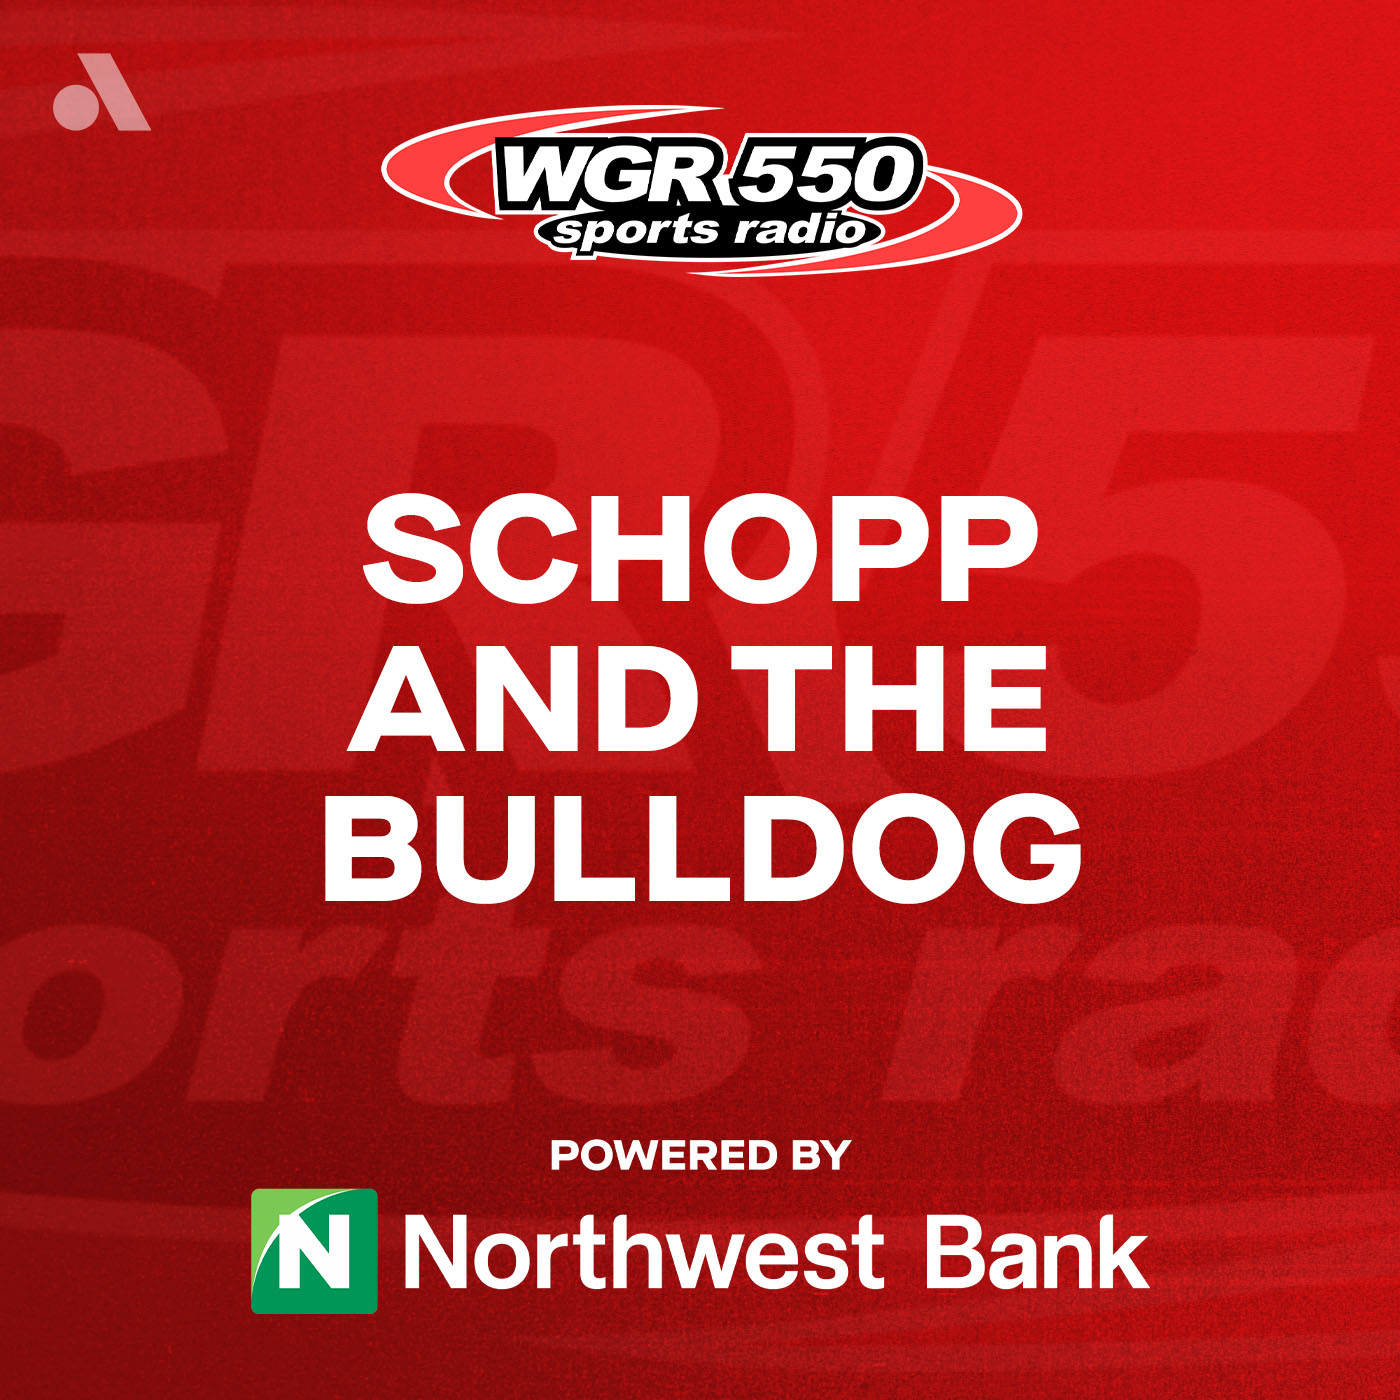 11-11 Bills safety Micah Hyde with Schopp and the Bulldog